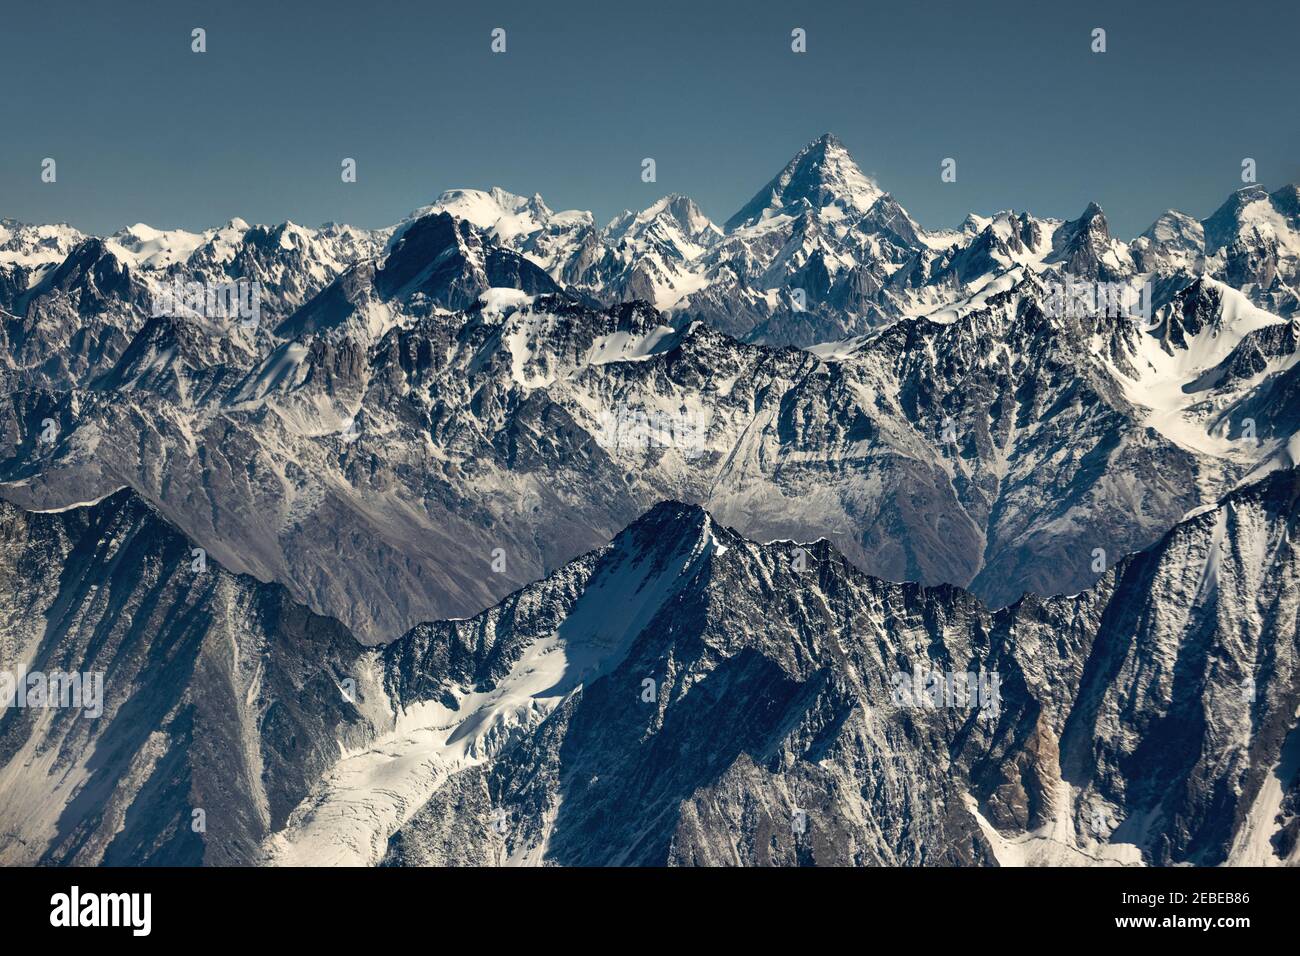 K2, world's 2nd largest mountain seen from an airplane Stock Photo